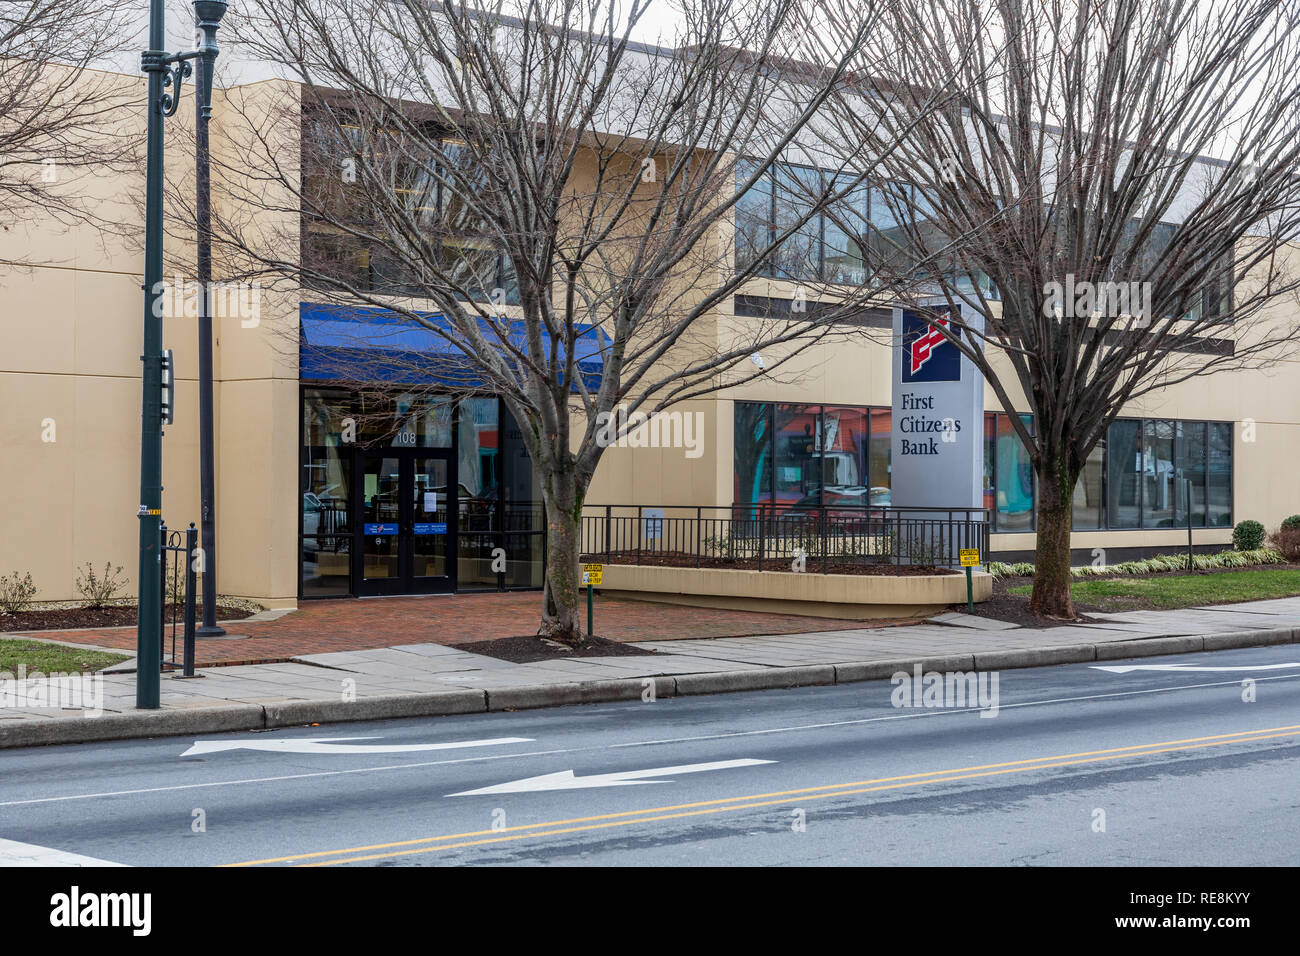 ASHEVILLE, NC, USA-1/18/19: A branch of First Citizens Bank in downtown. Stock Photo